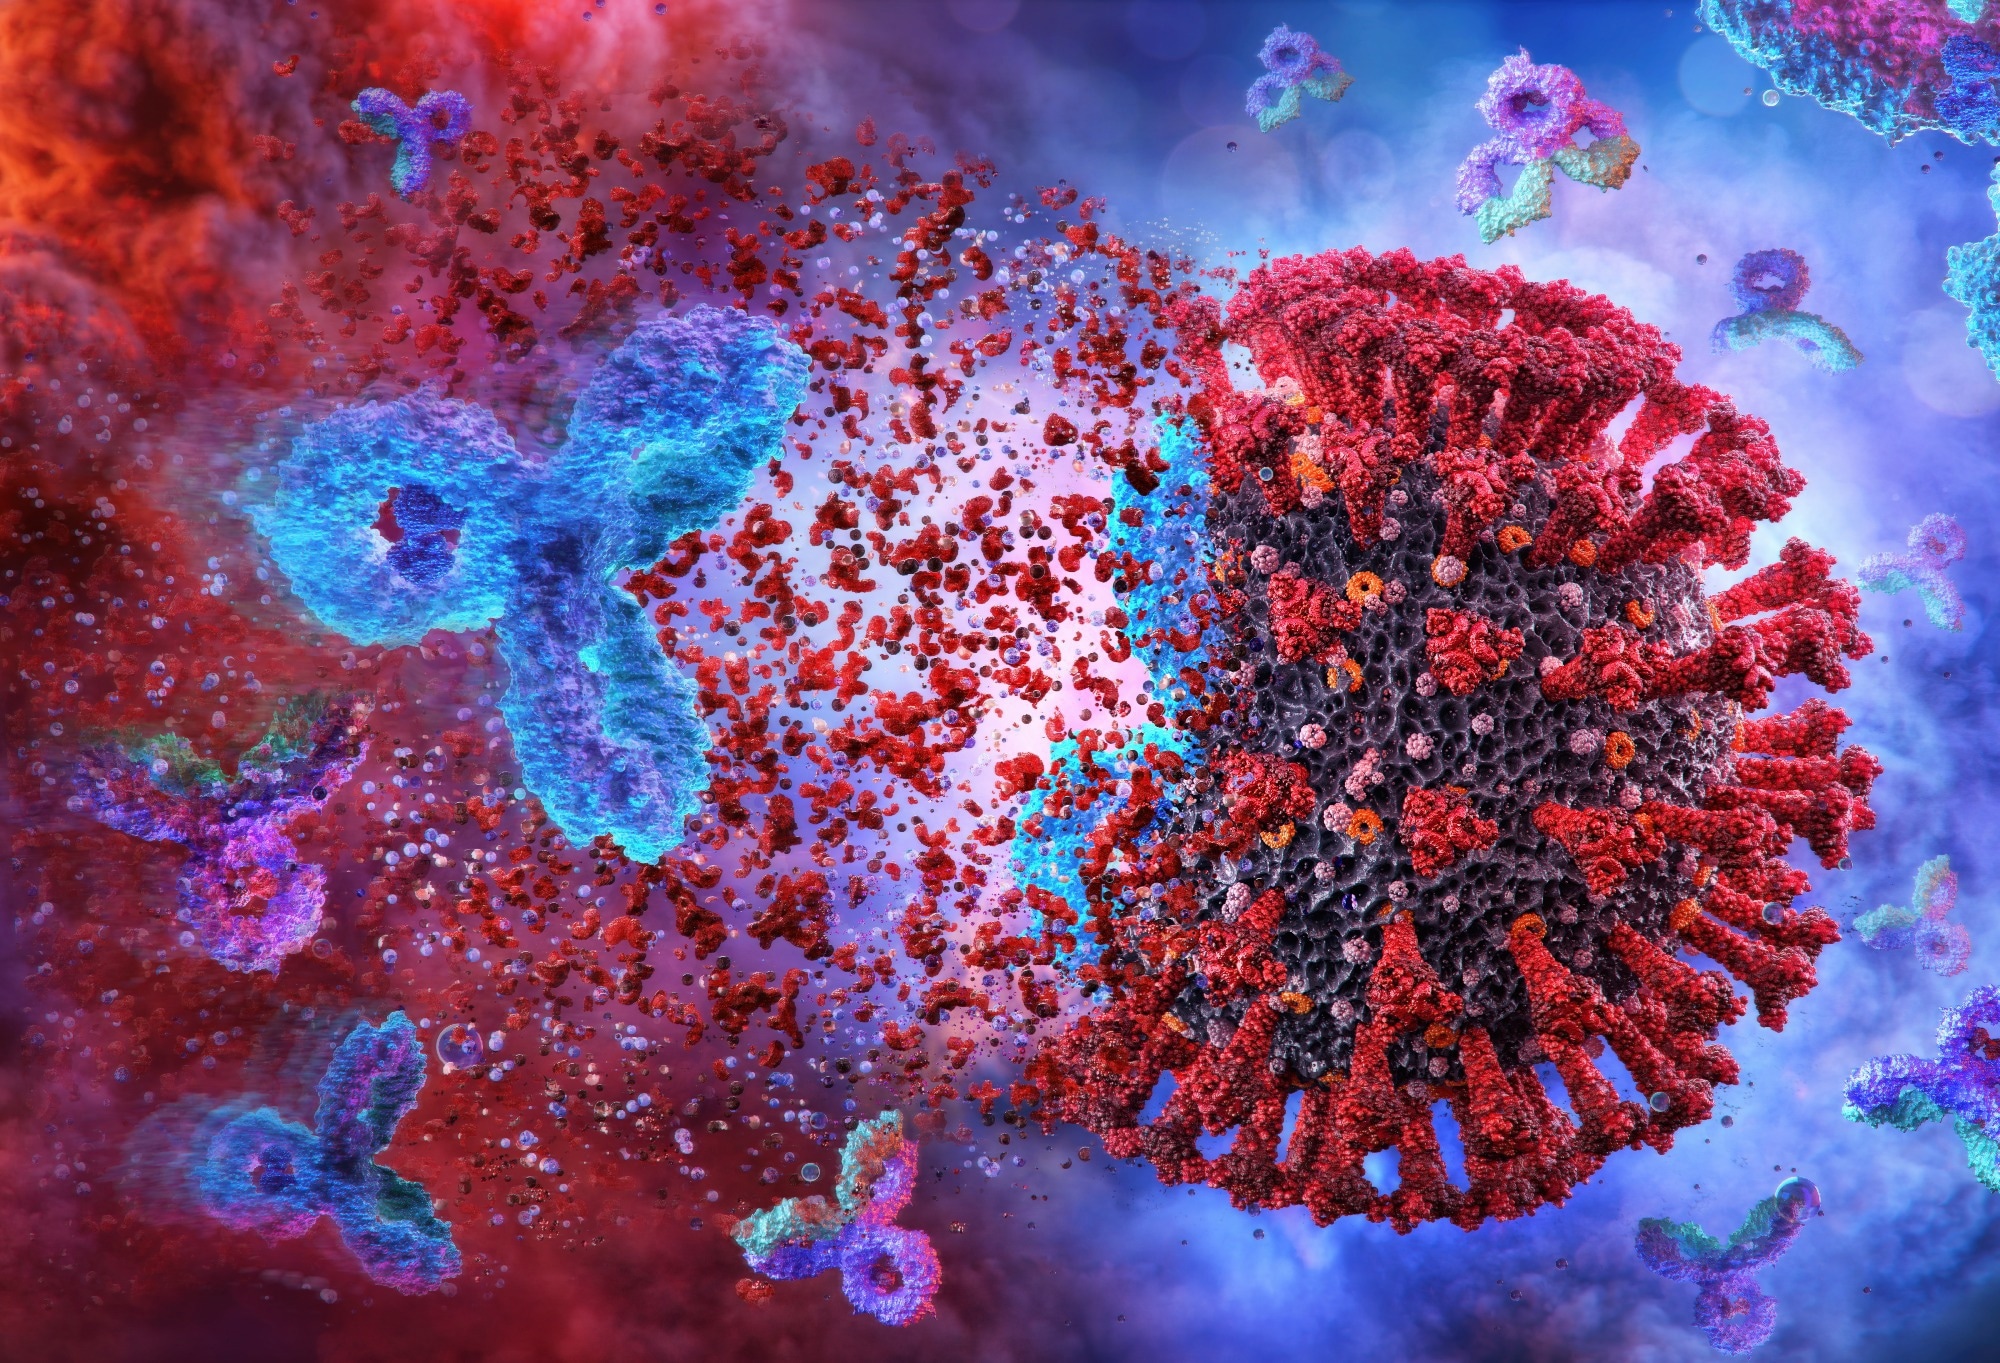 Study: Efficacy of SARS-CoV-2 vaccines and the dose–response relationship with three major antibodies: a systematic review and meta-analysis of randomised controlled trials. Image Credit: Corona Borealis Studio/Shutterstock